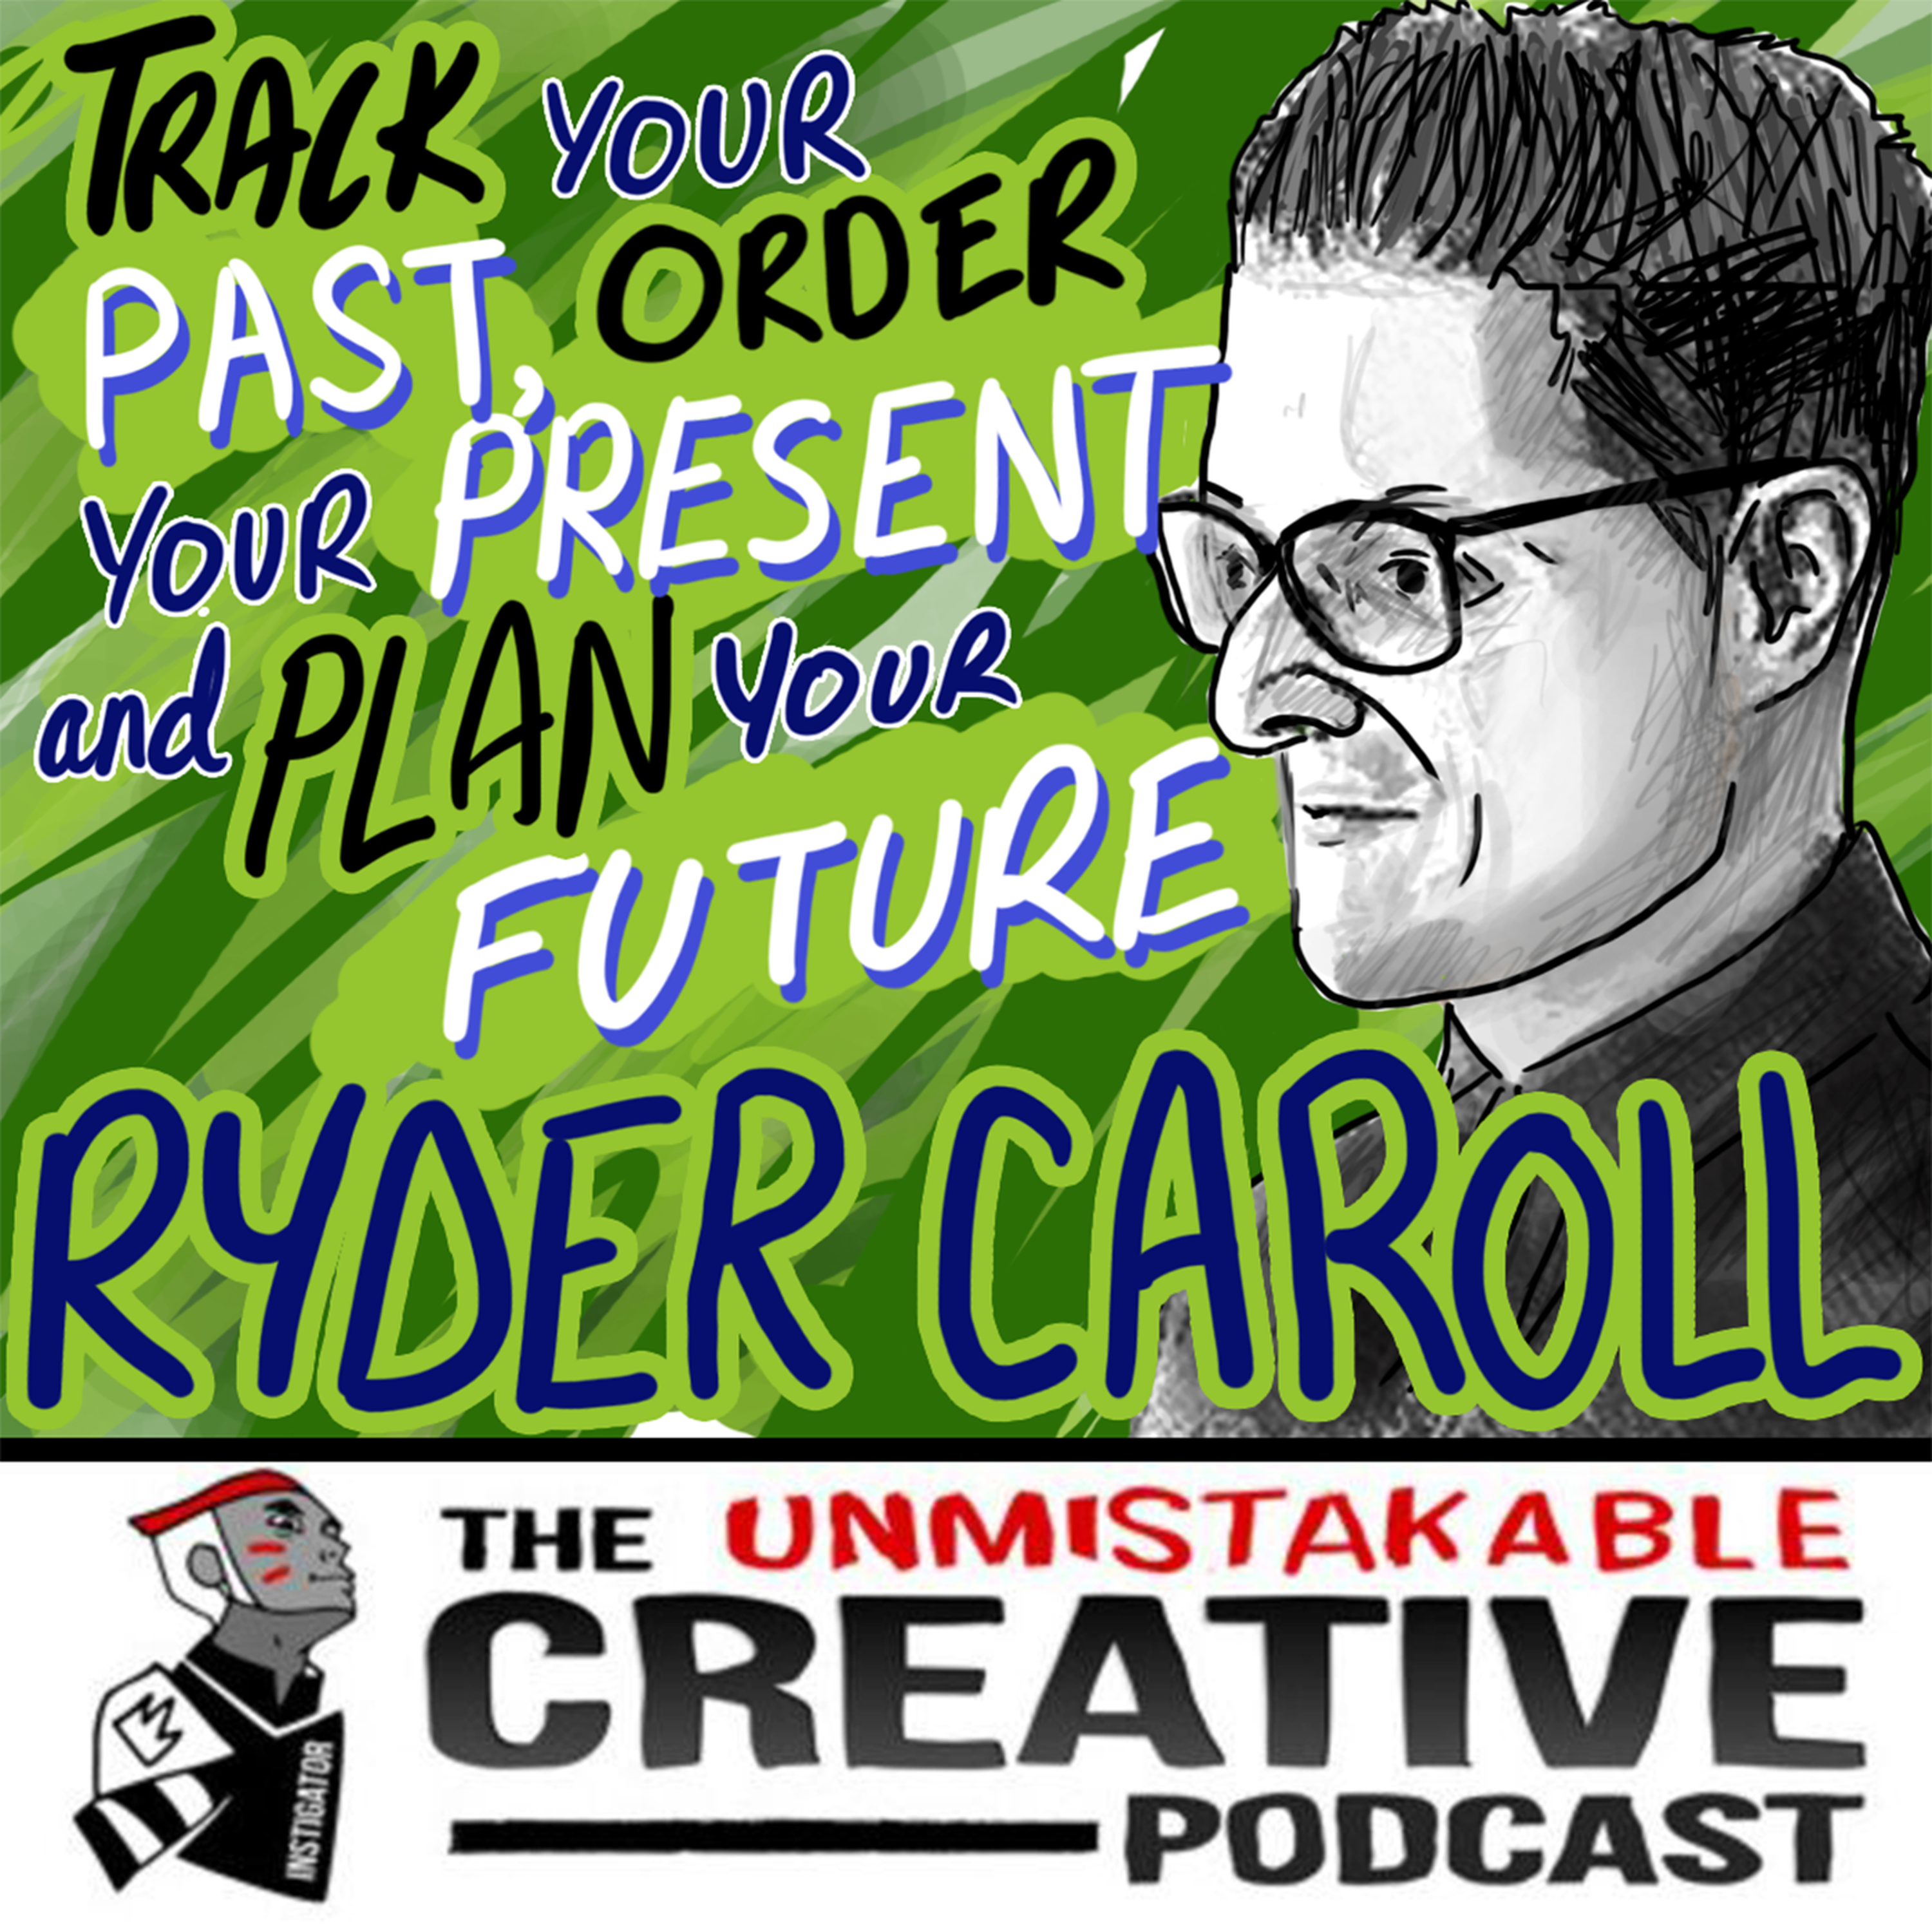 Listener Favorites | Ryder Carroll: Track Your Past, Order Your Present, and Plan Your Future